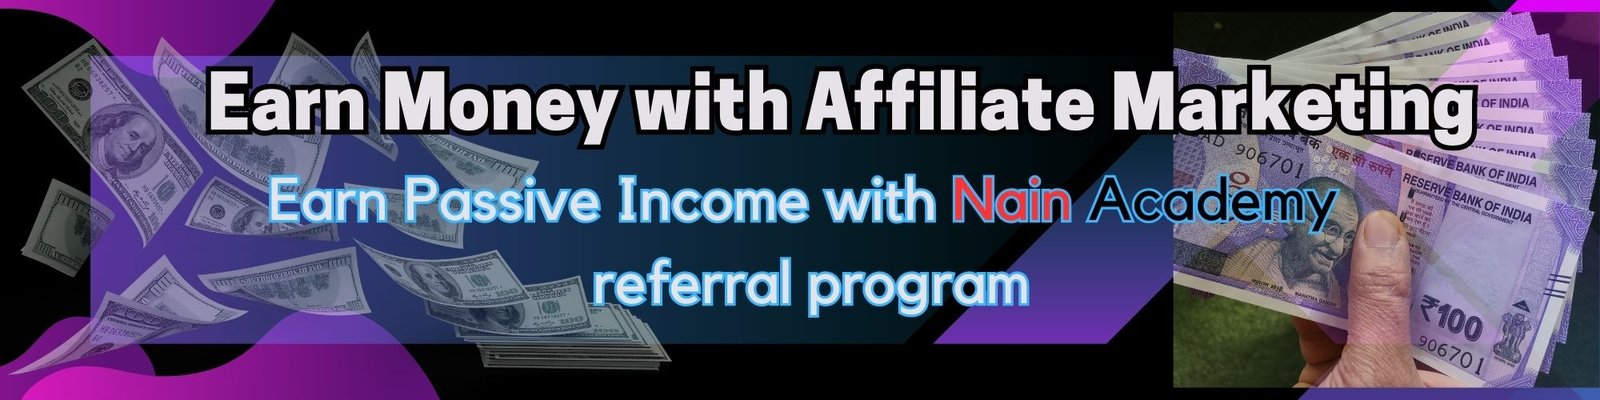 How to Earn Passive Income with Affiliate Marketing